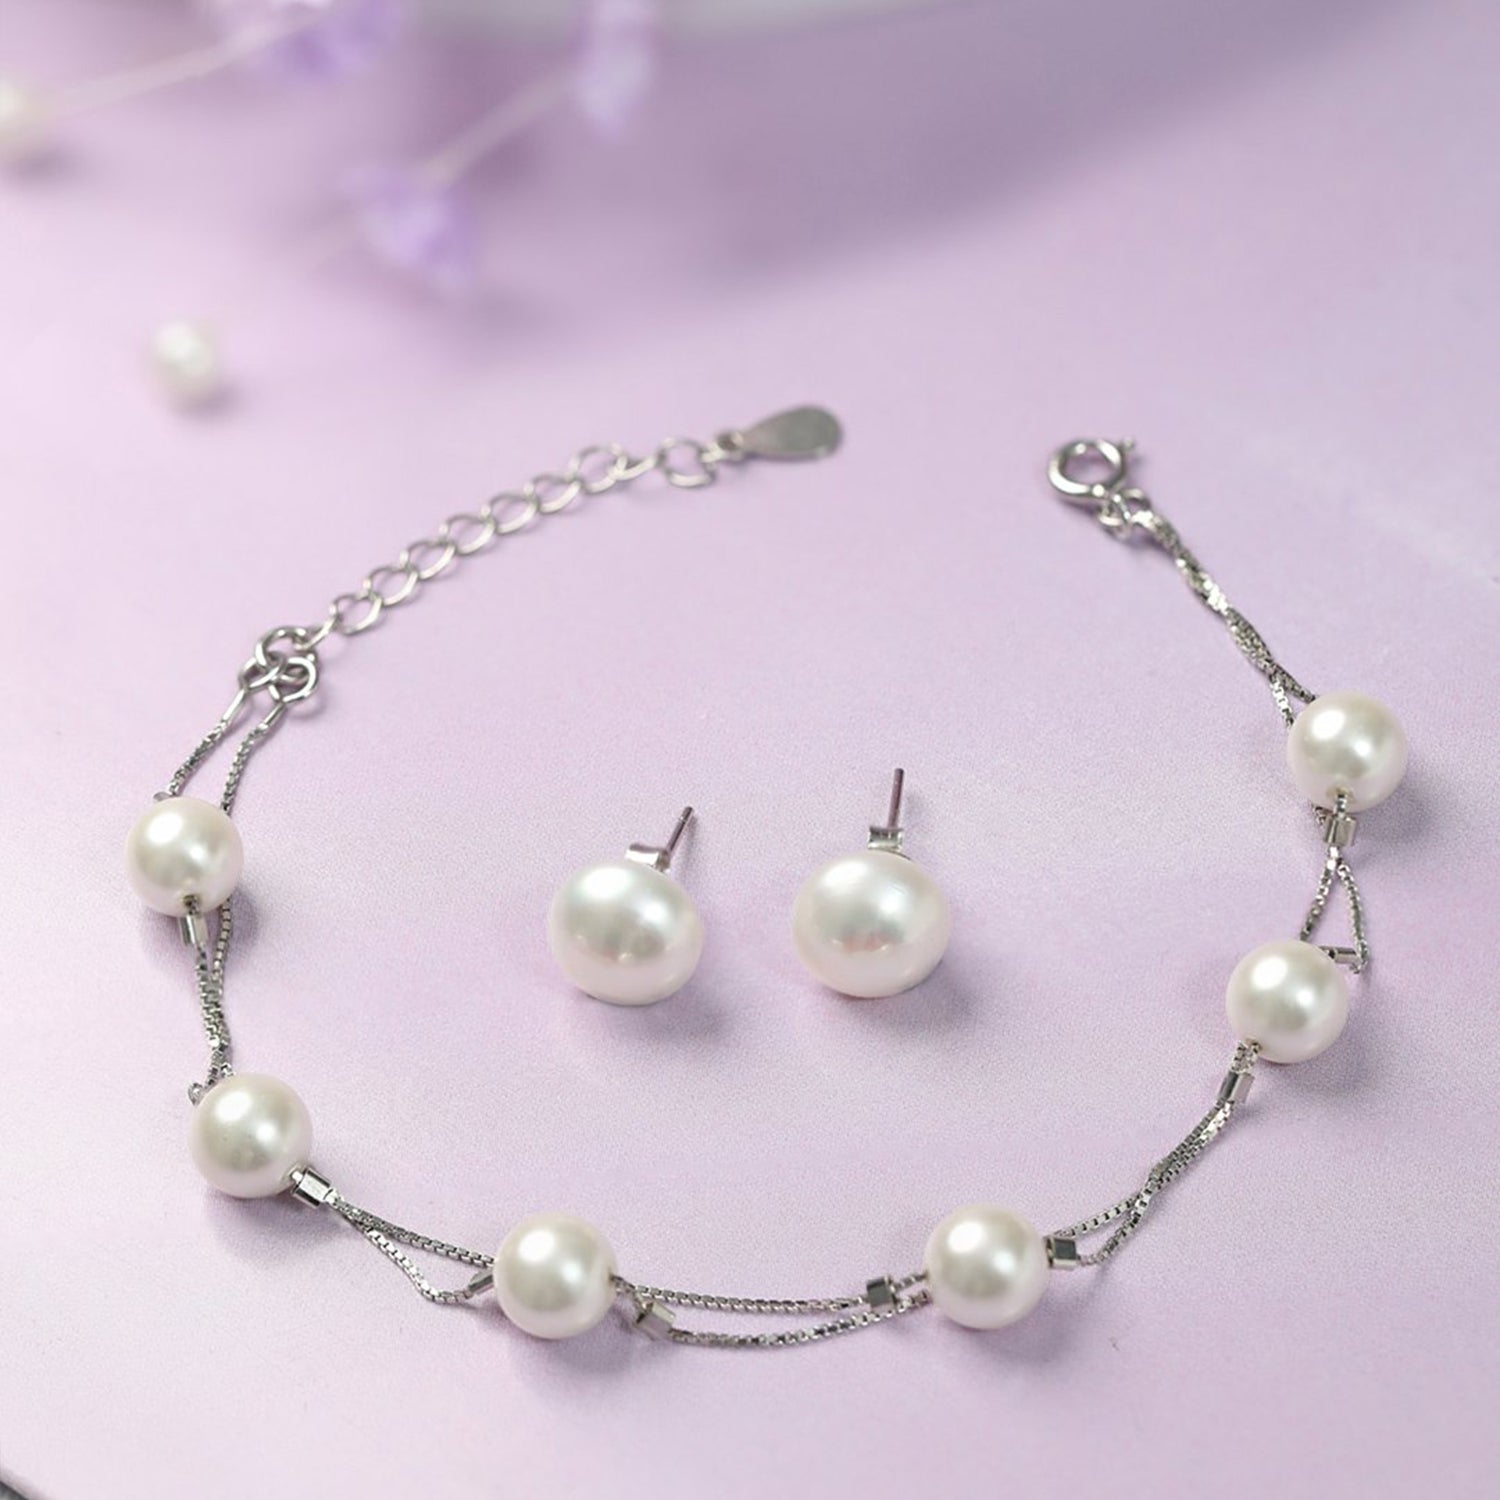 Victoria Freshwater Pearl 925 Silver Bracelet and Earrings Set